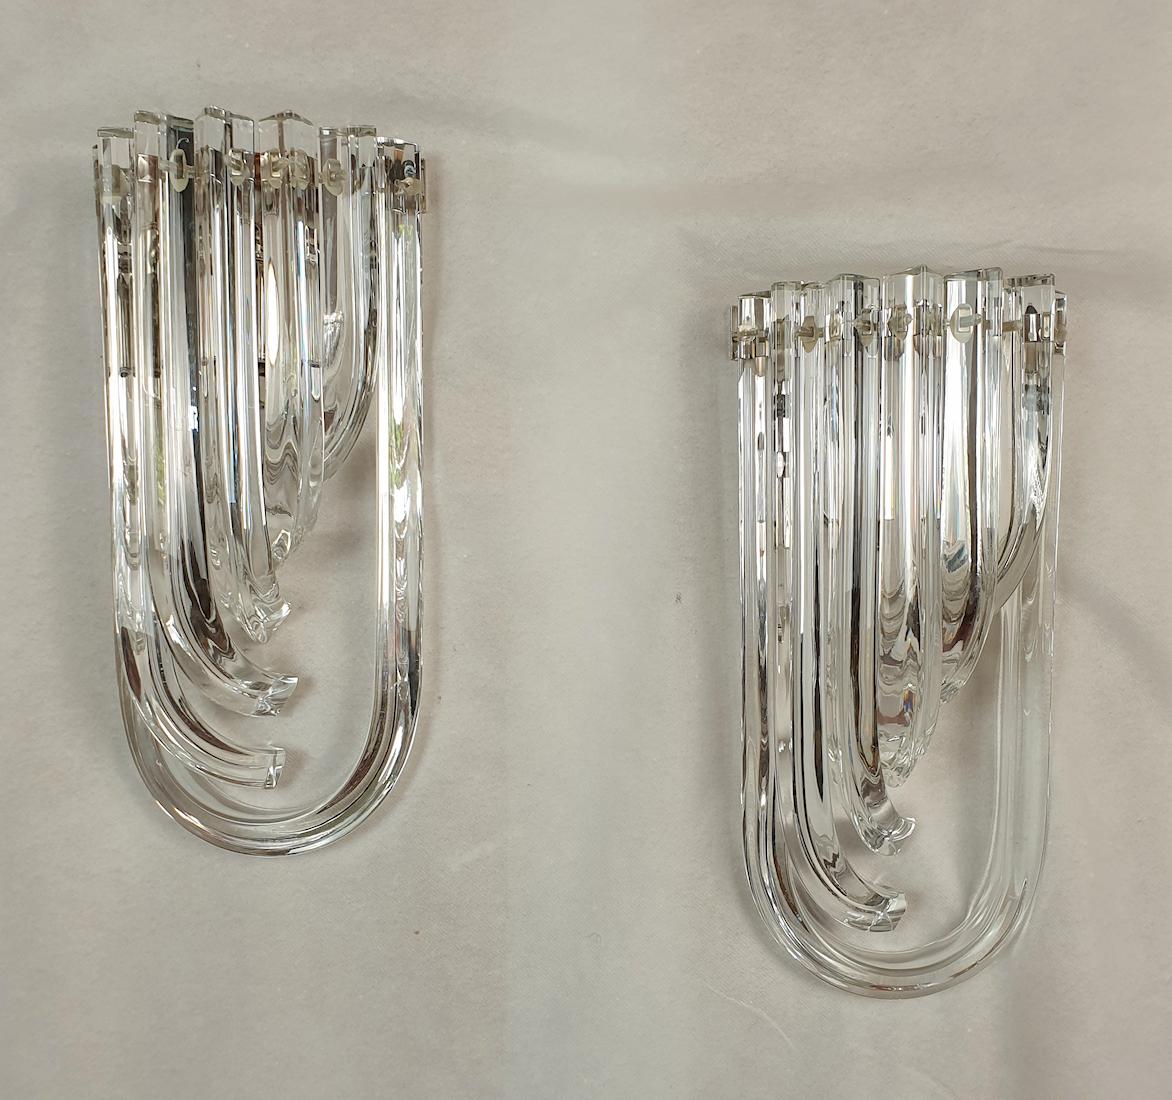 Pair of curved unusual Murano glass wall sconces, by Venini Italy, 1980s.
Two pairs available; priced and sold by pair.
The Mid-Century Modern pair is made of curved hand blown clear Murano glass Triedri, on a chrome frame.
A timeless design,